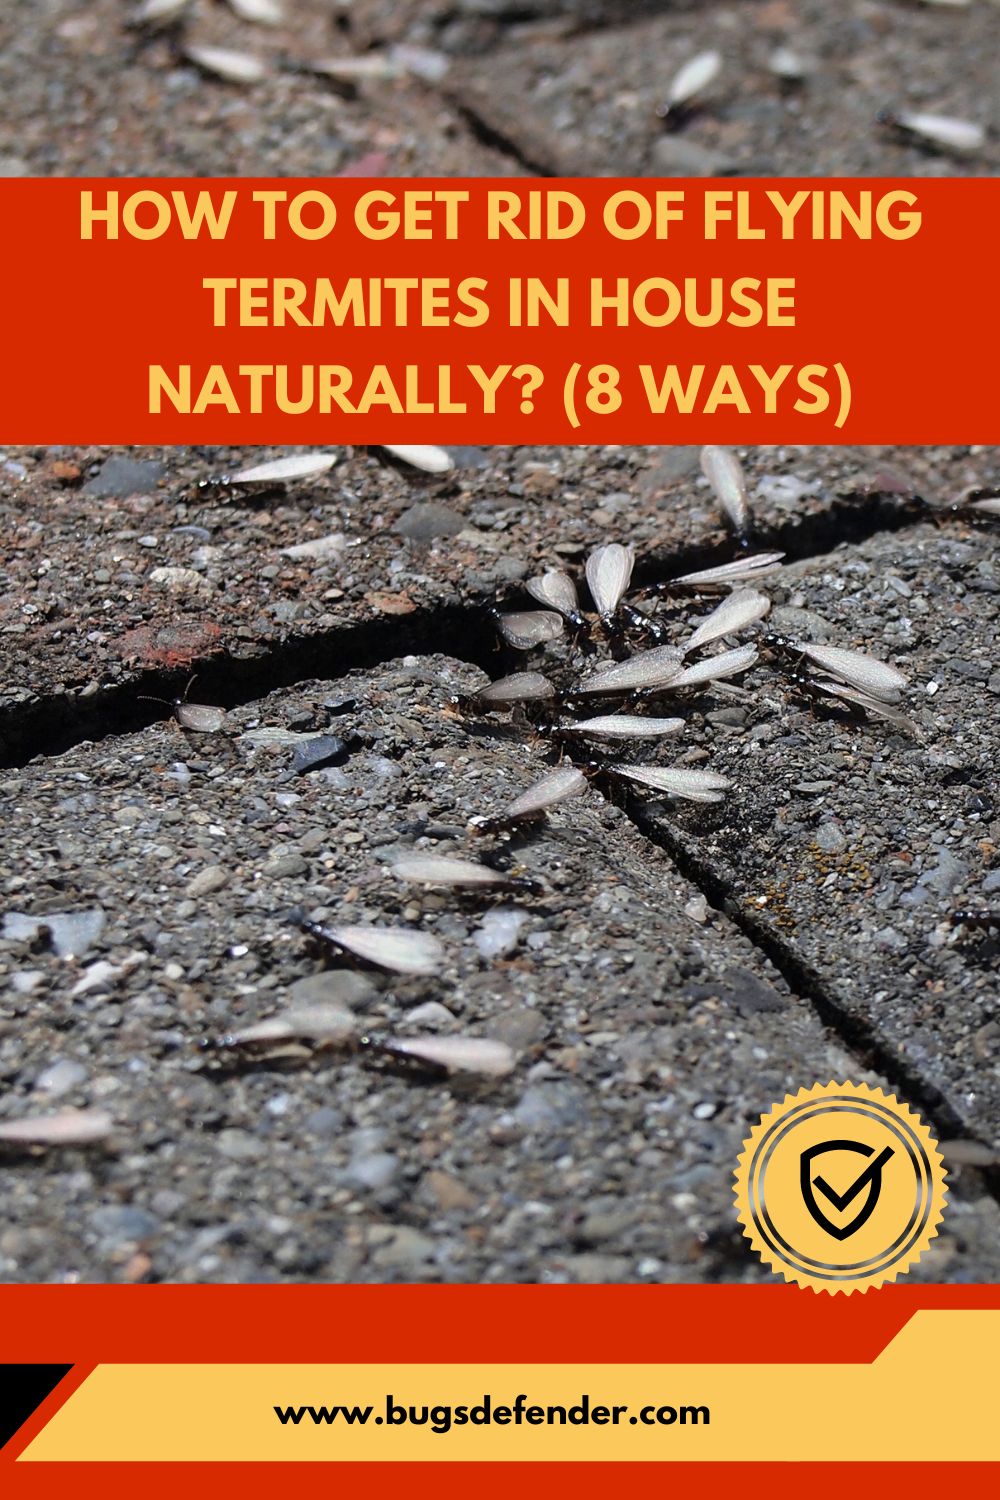 How To Get Rid Of Flying Termites In House Naturally? (8 Ways) pin1